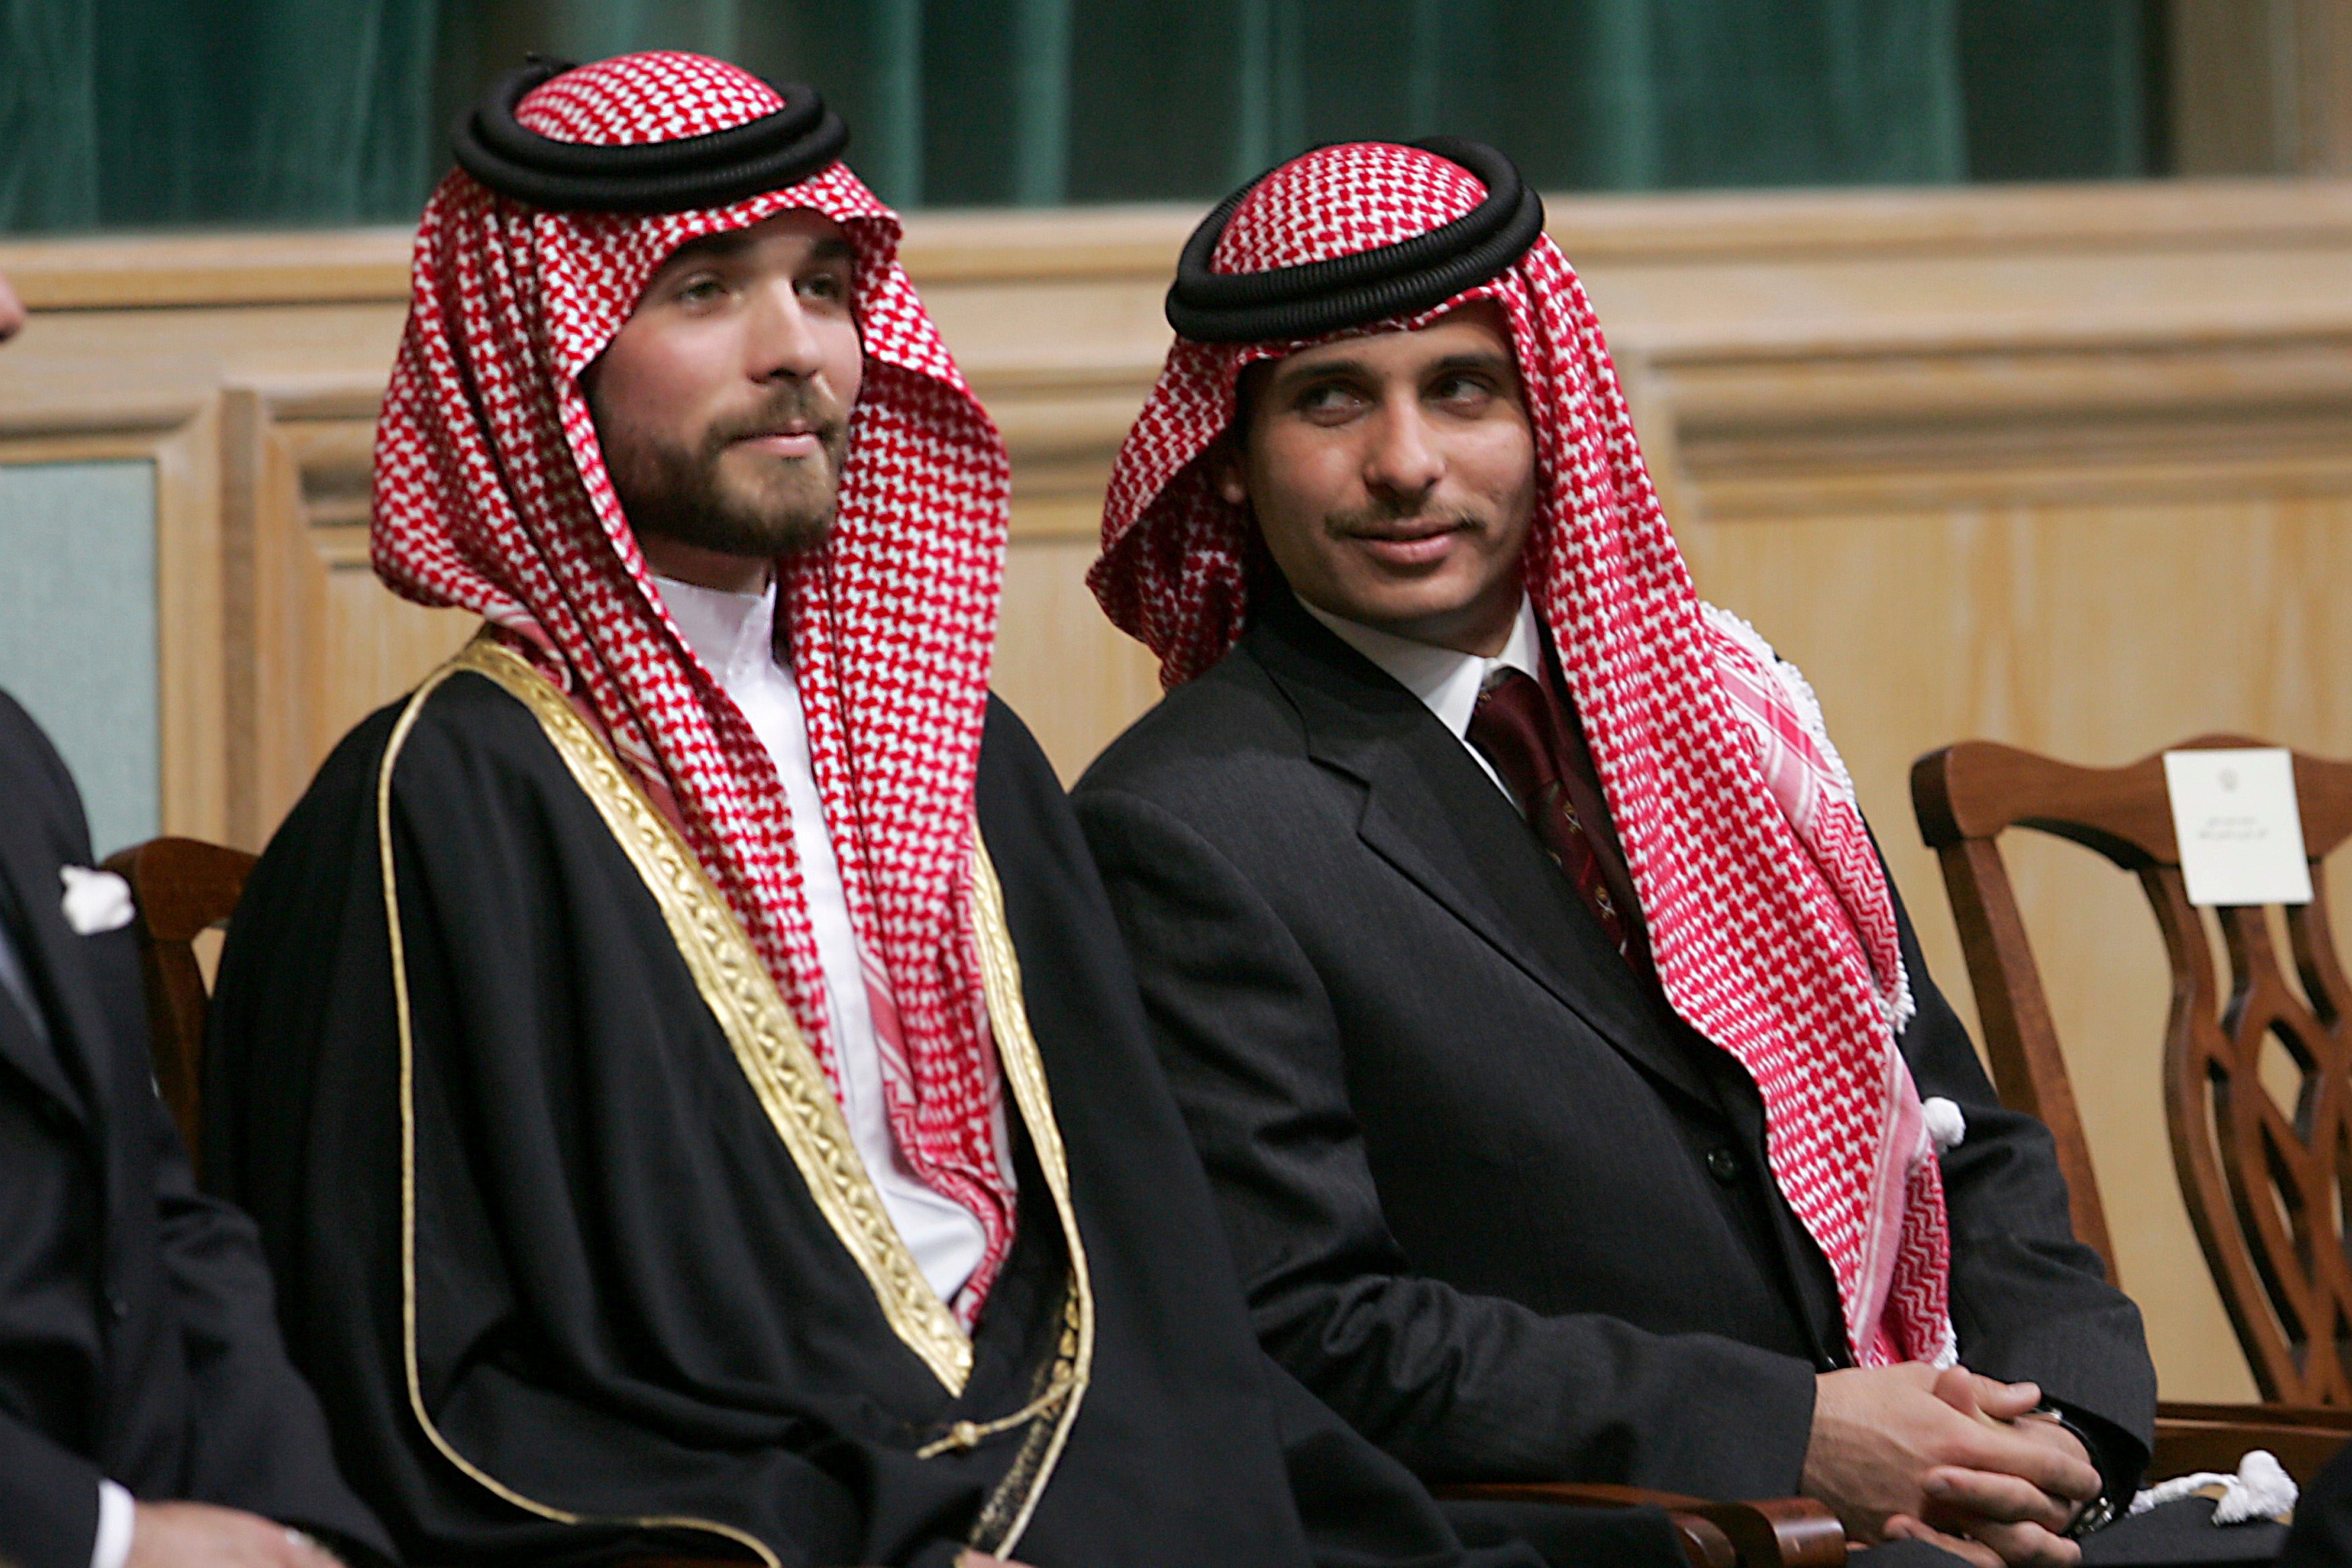 Prince Hamzah Bin Al-Hussein (right) says his phone and internet services have been cut off